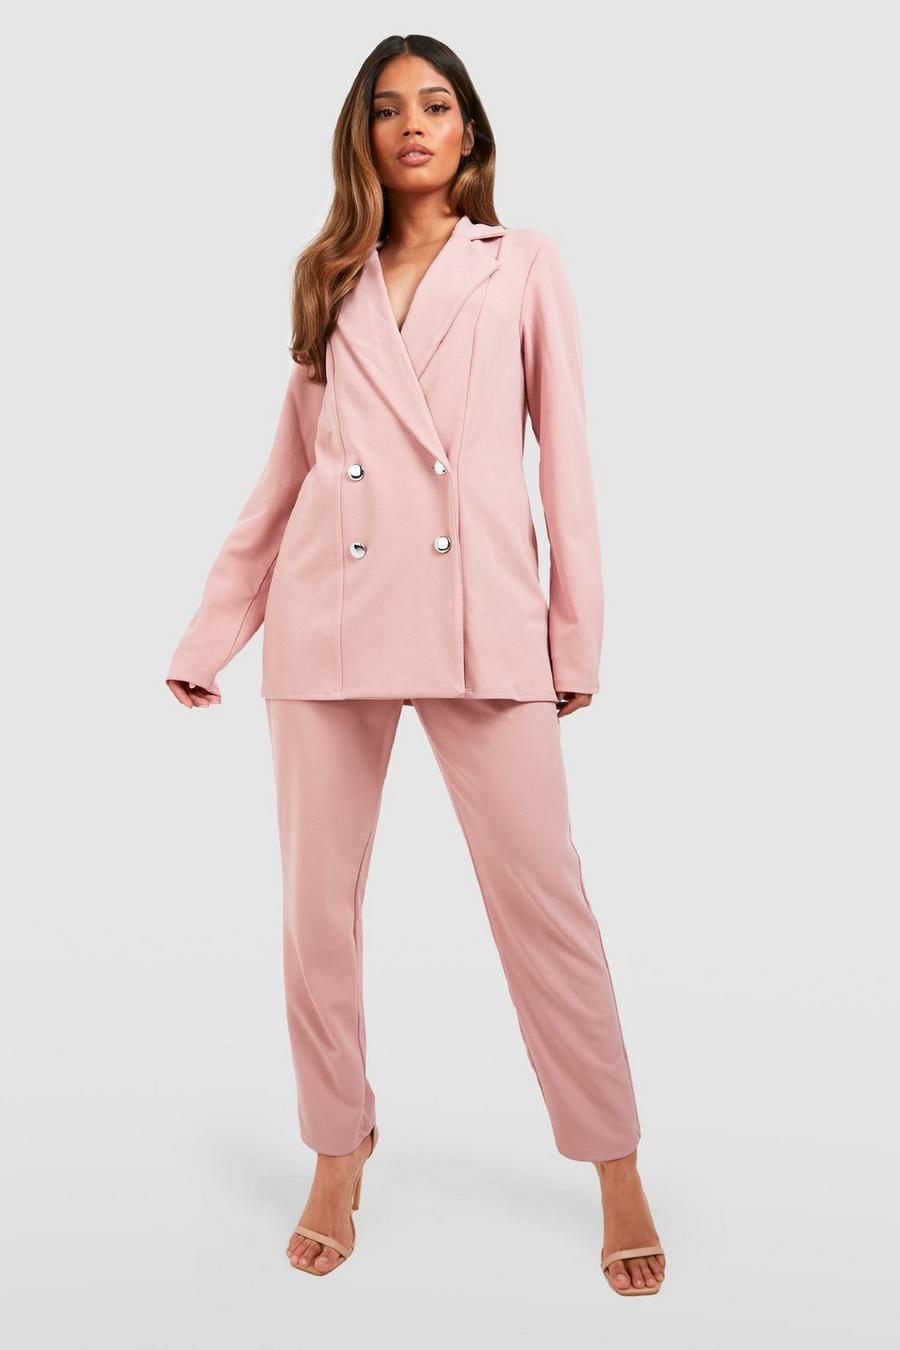 Rose Jersey Double Breasted Blazer & Straight Leg Pants image number 1